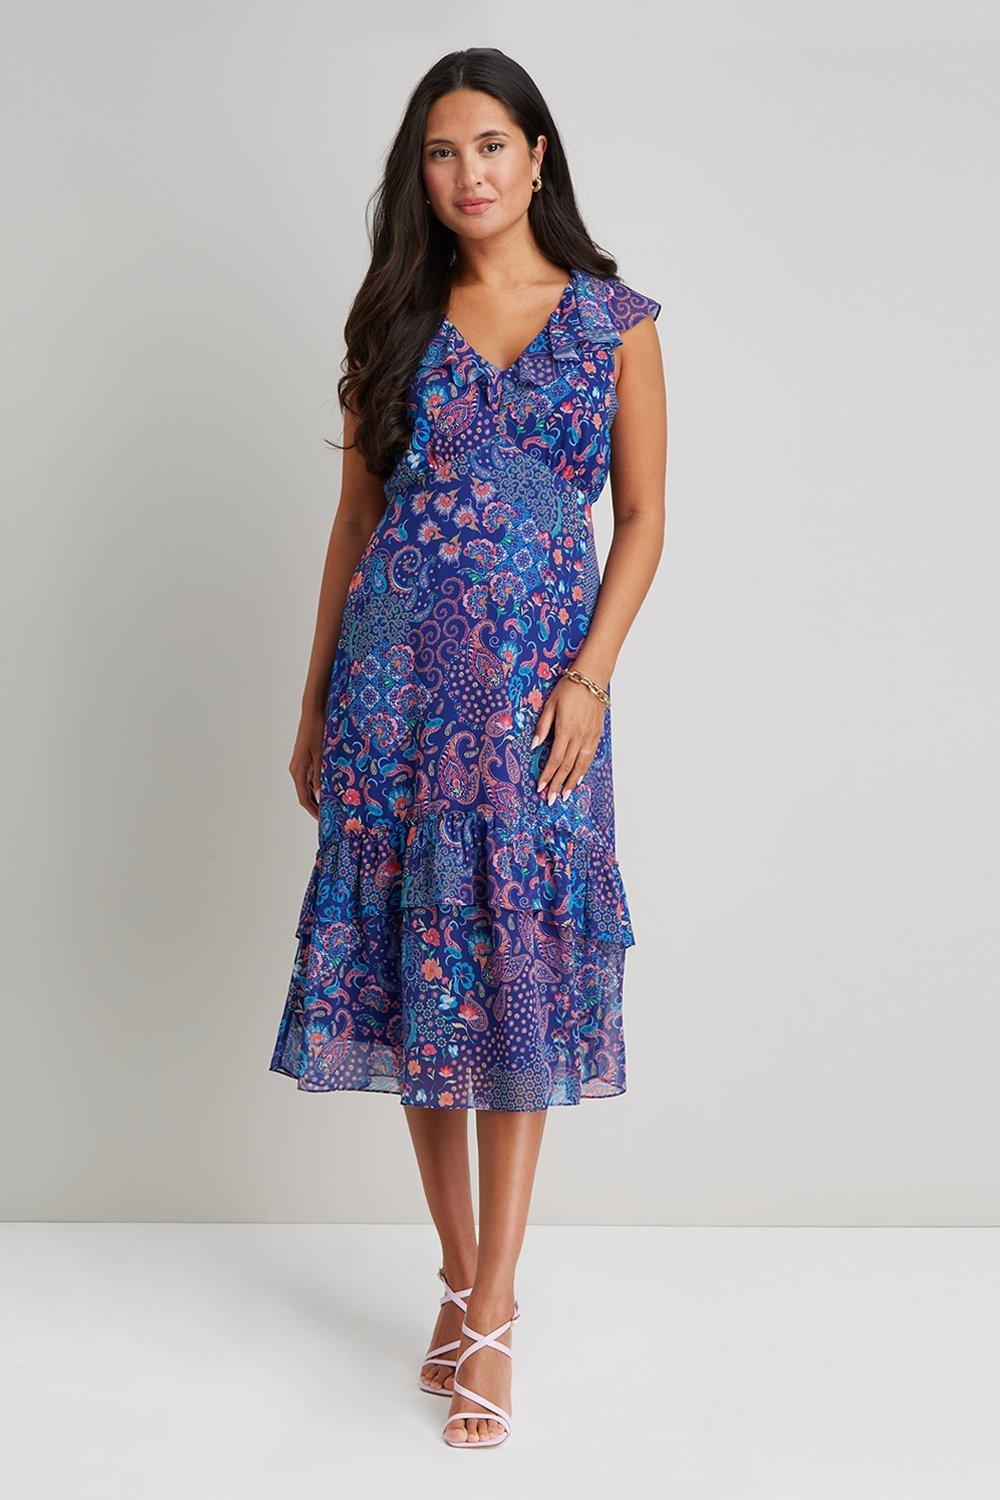 Shop Petite Occasionwear Online Today ...